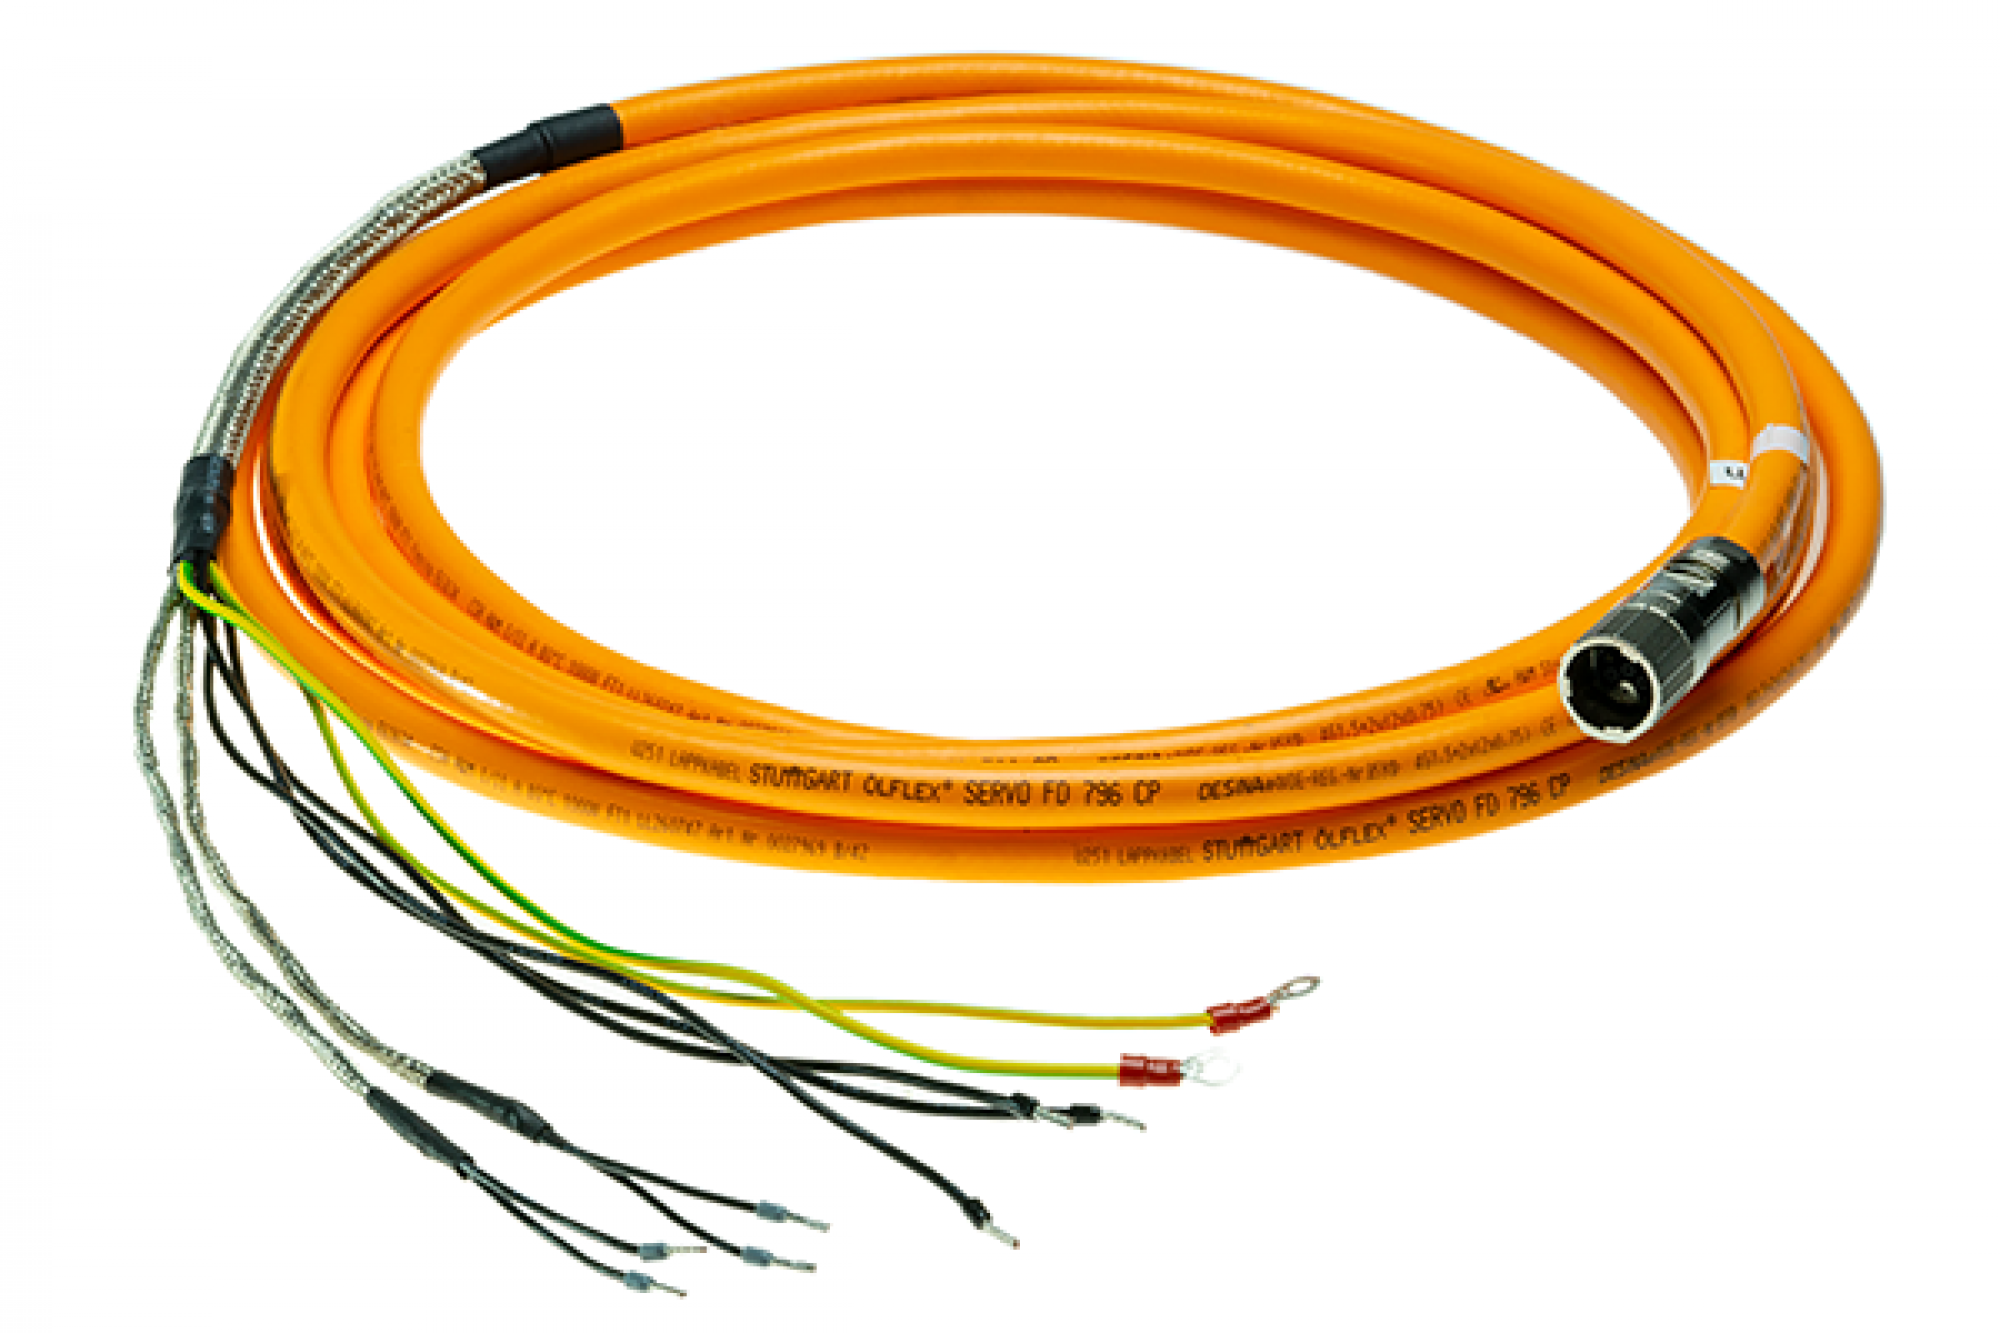 Motor connection cable for air-cooled spindles - 15 m